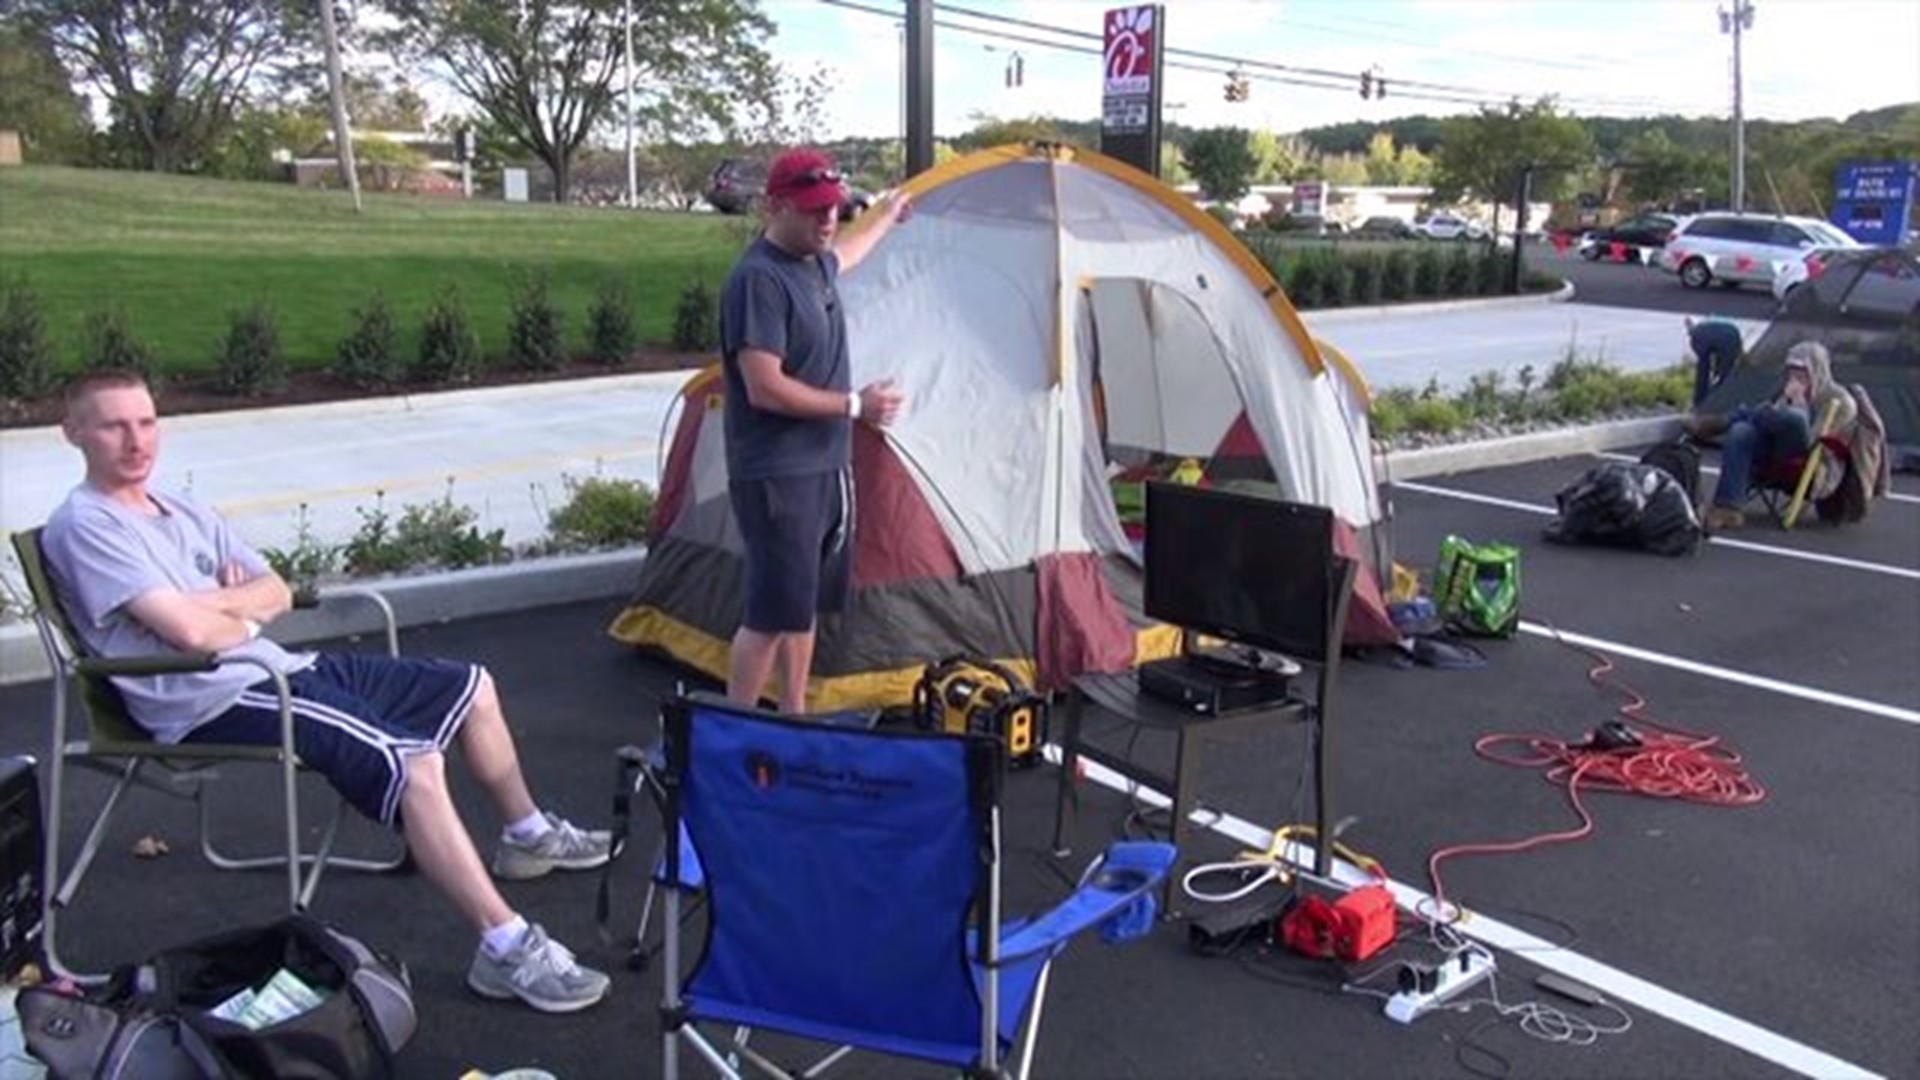 People Camp Out For Brookfield Chick-Fil-A